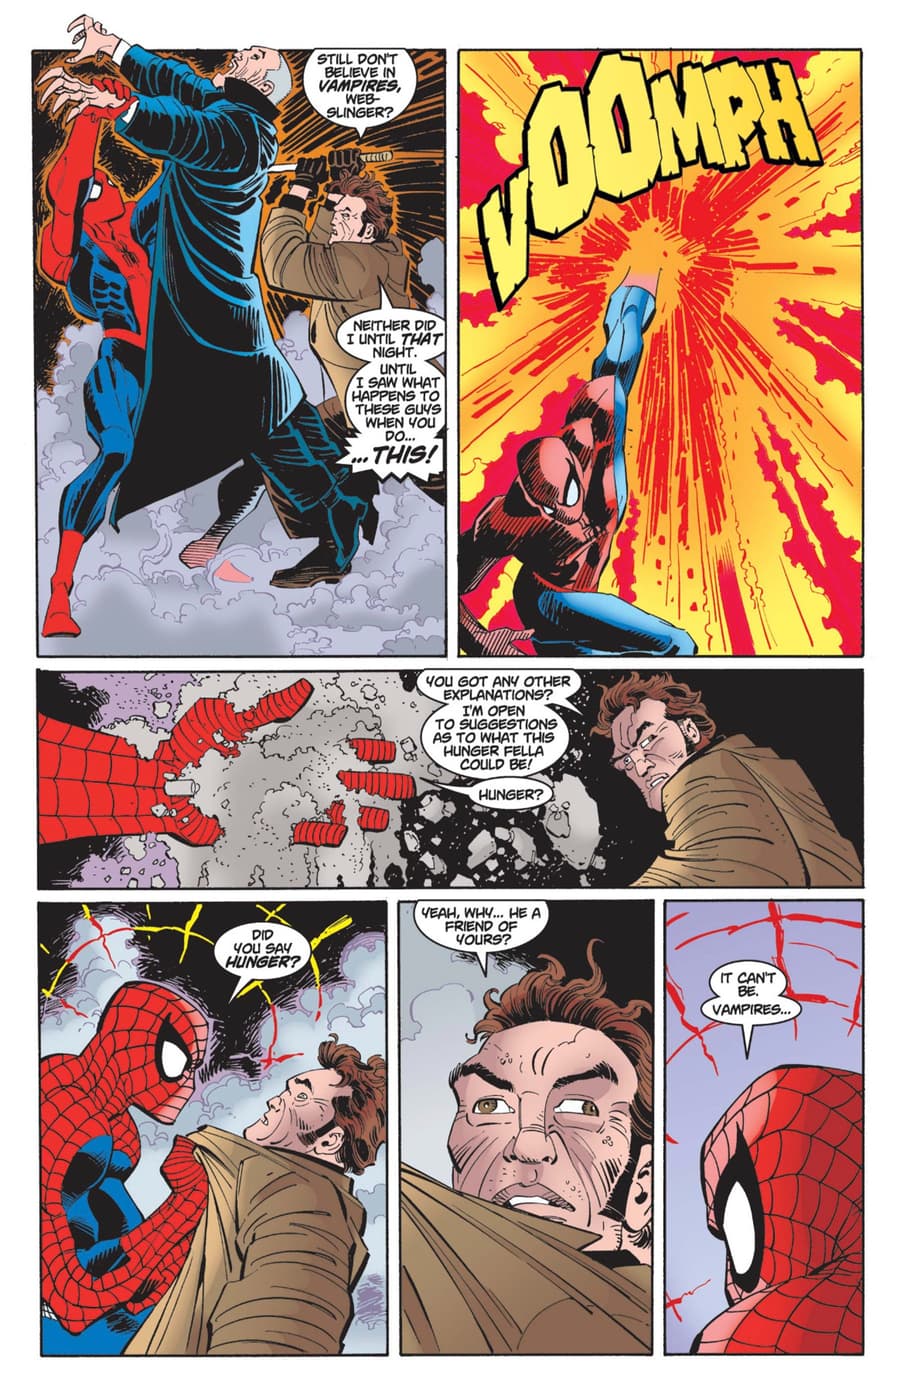 PETER PARKER: SPIDER-MAN (1999) #7 page by Howard Mackie and John Romita Jr.